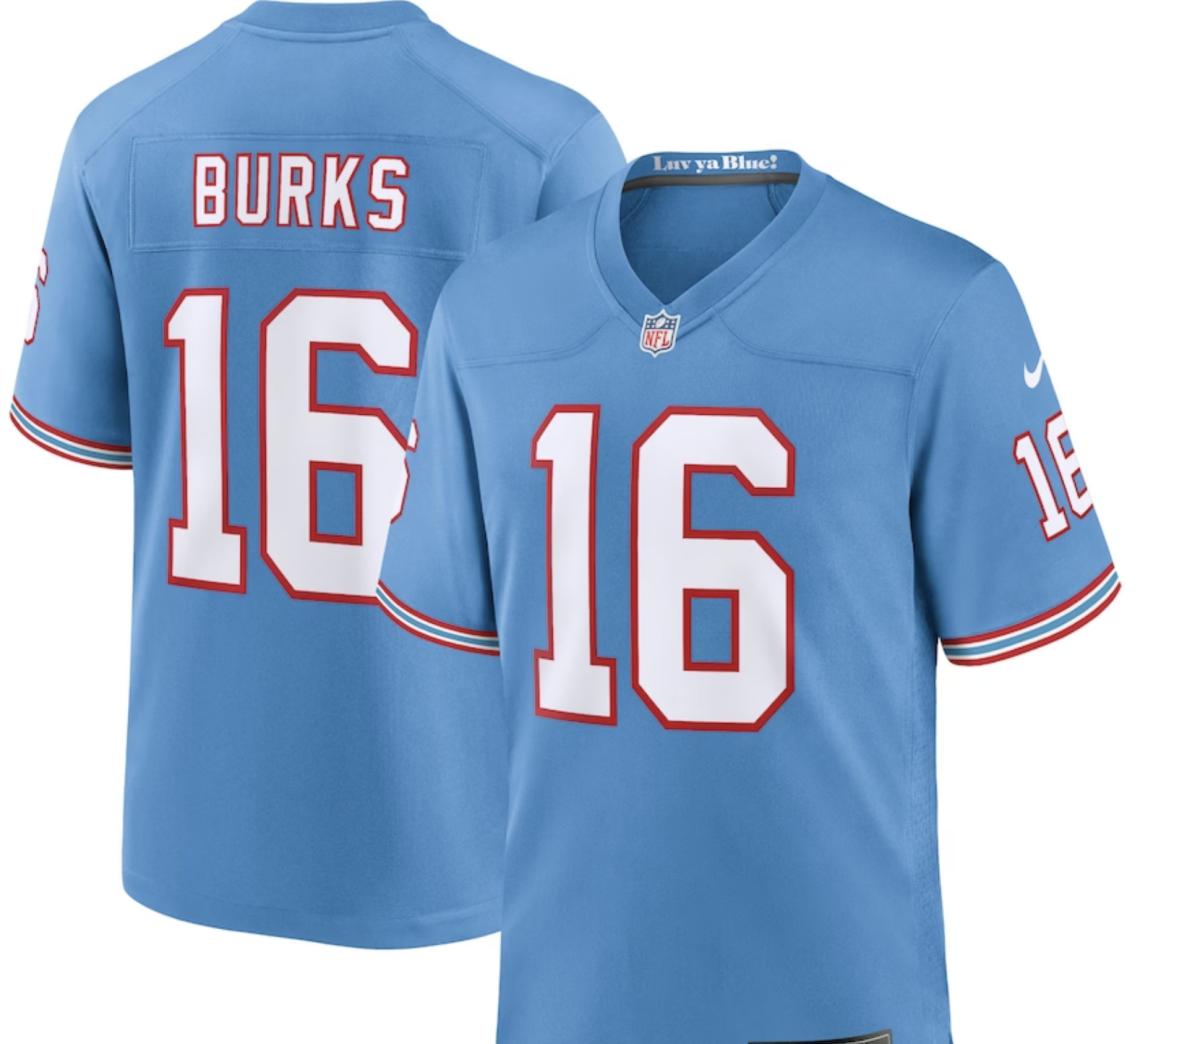 Tennessee Oilers Home Uniform  Tennessee oilers, Tennessee titans